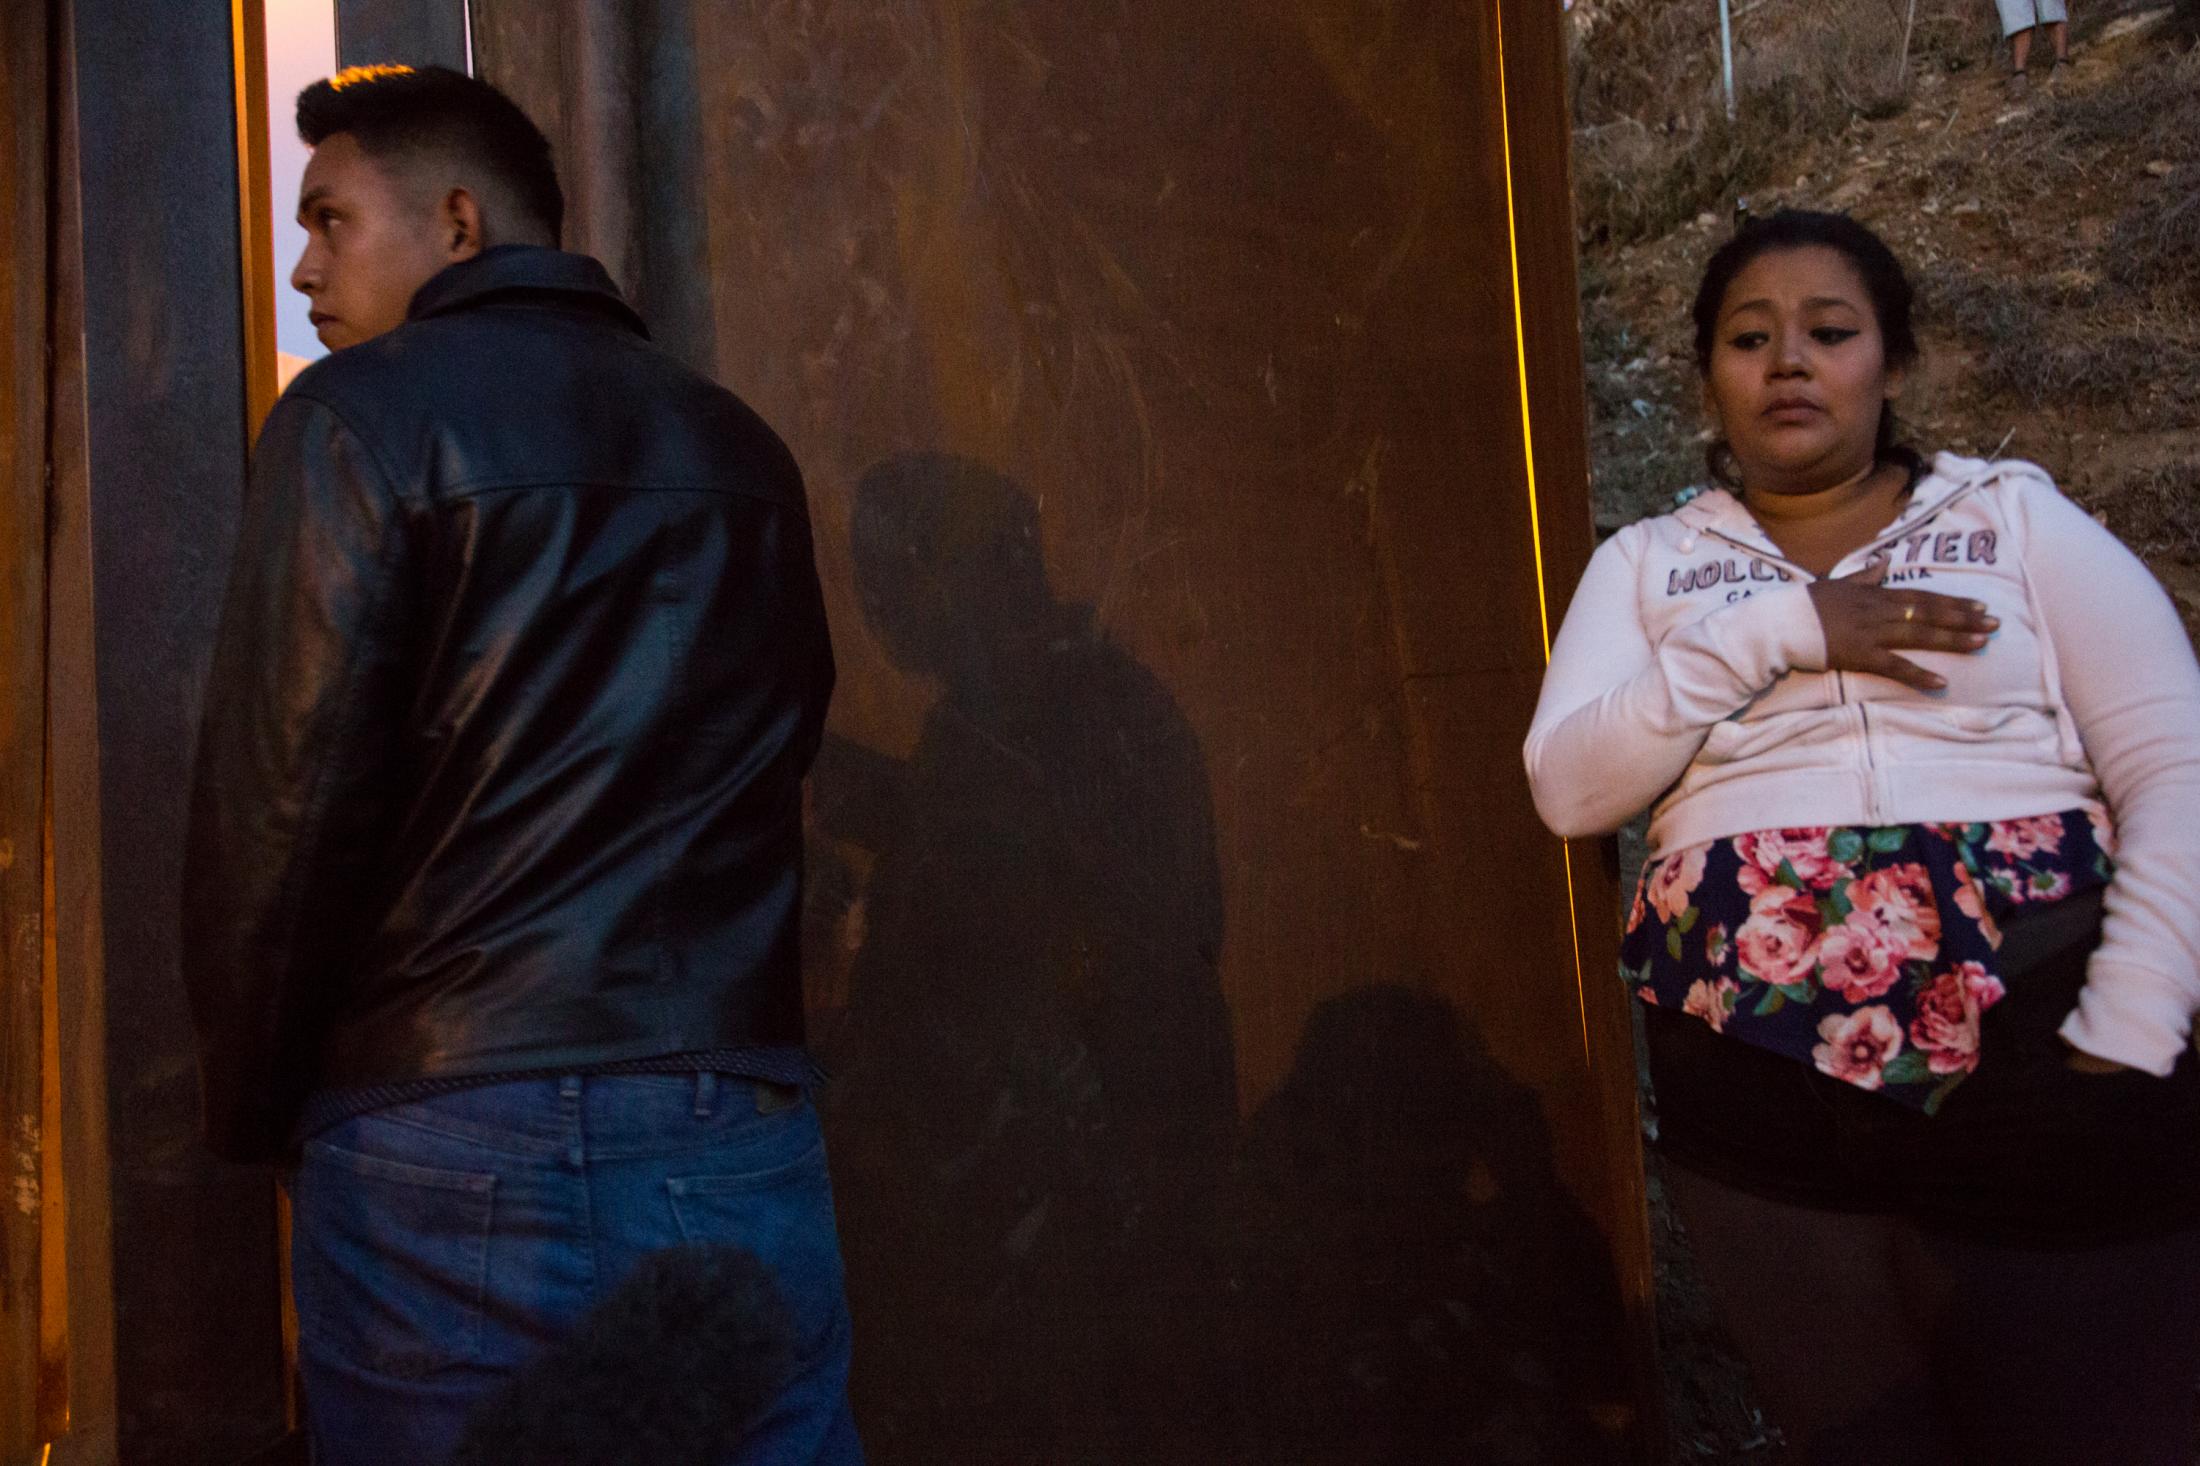 Sofia, 22, and her cousin, Dannel, waiting to enter the US illegally, over the wall at Tijuana...